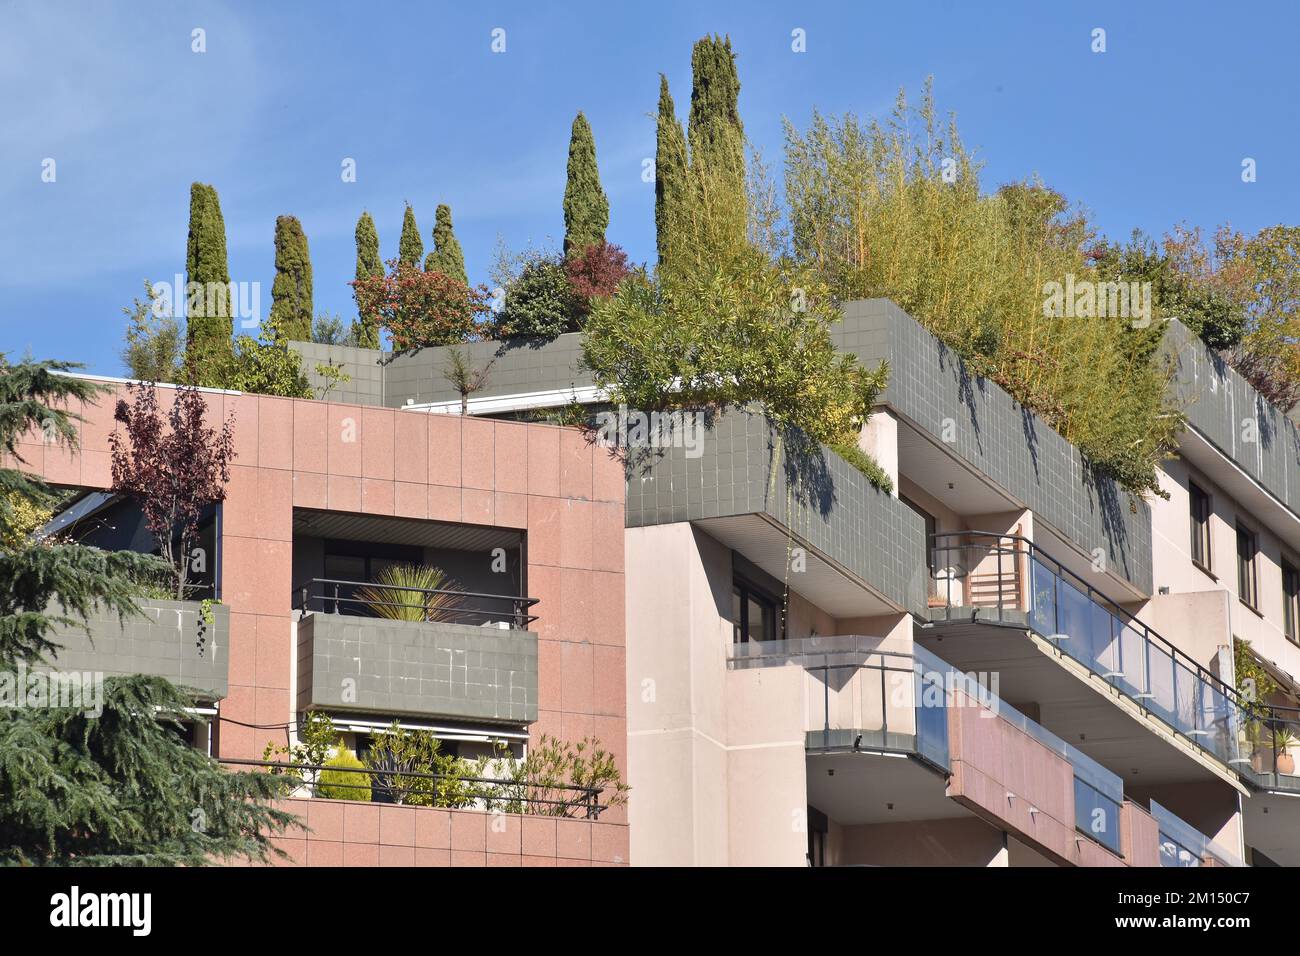 Spectacularly luxuriant roof gardens with full grown trees and shrubs on a block of apartments in a narrow street in Toulouse, France Stock Photo